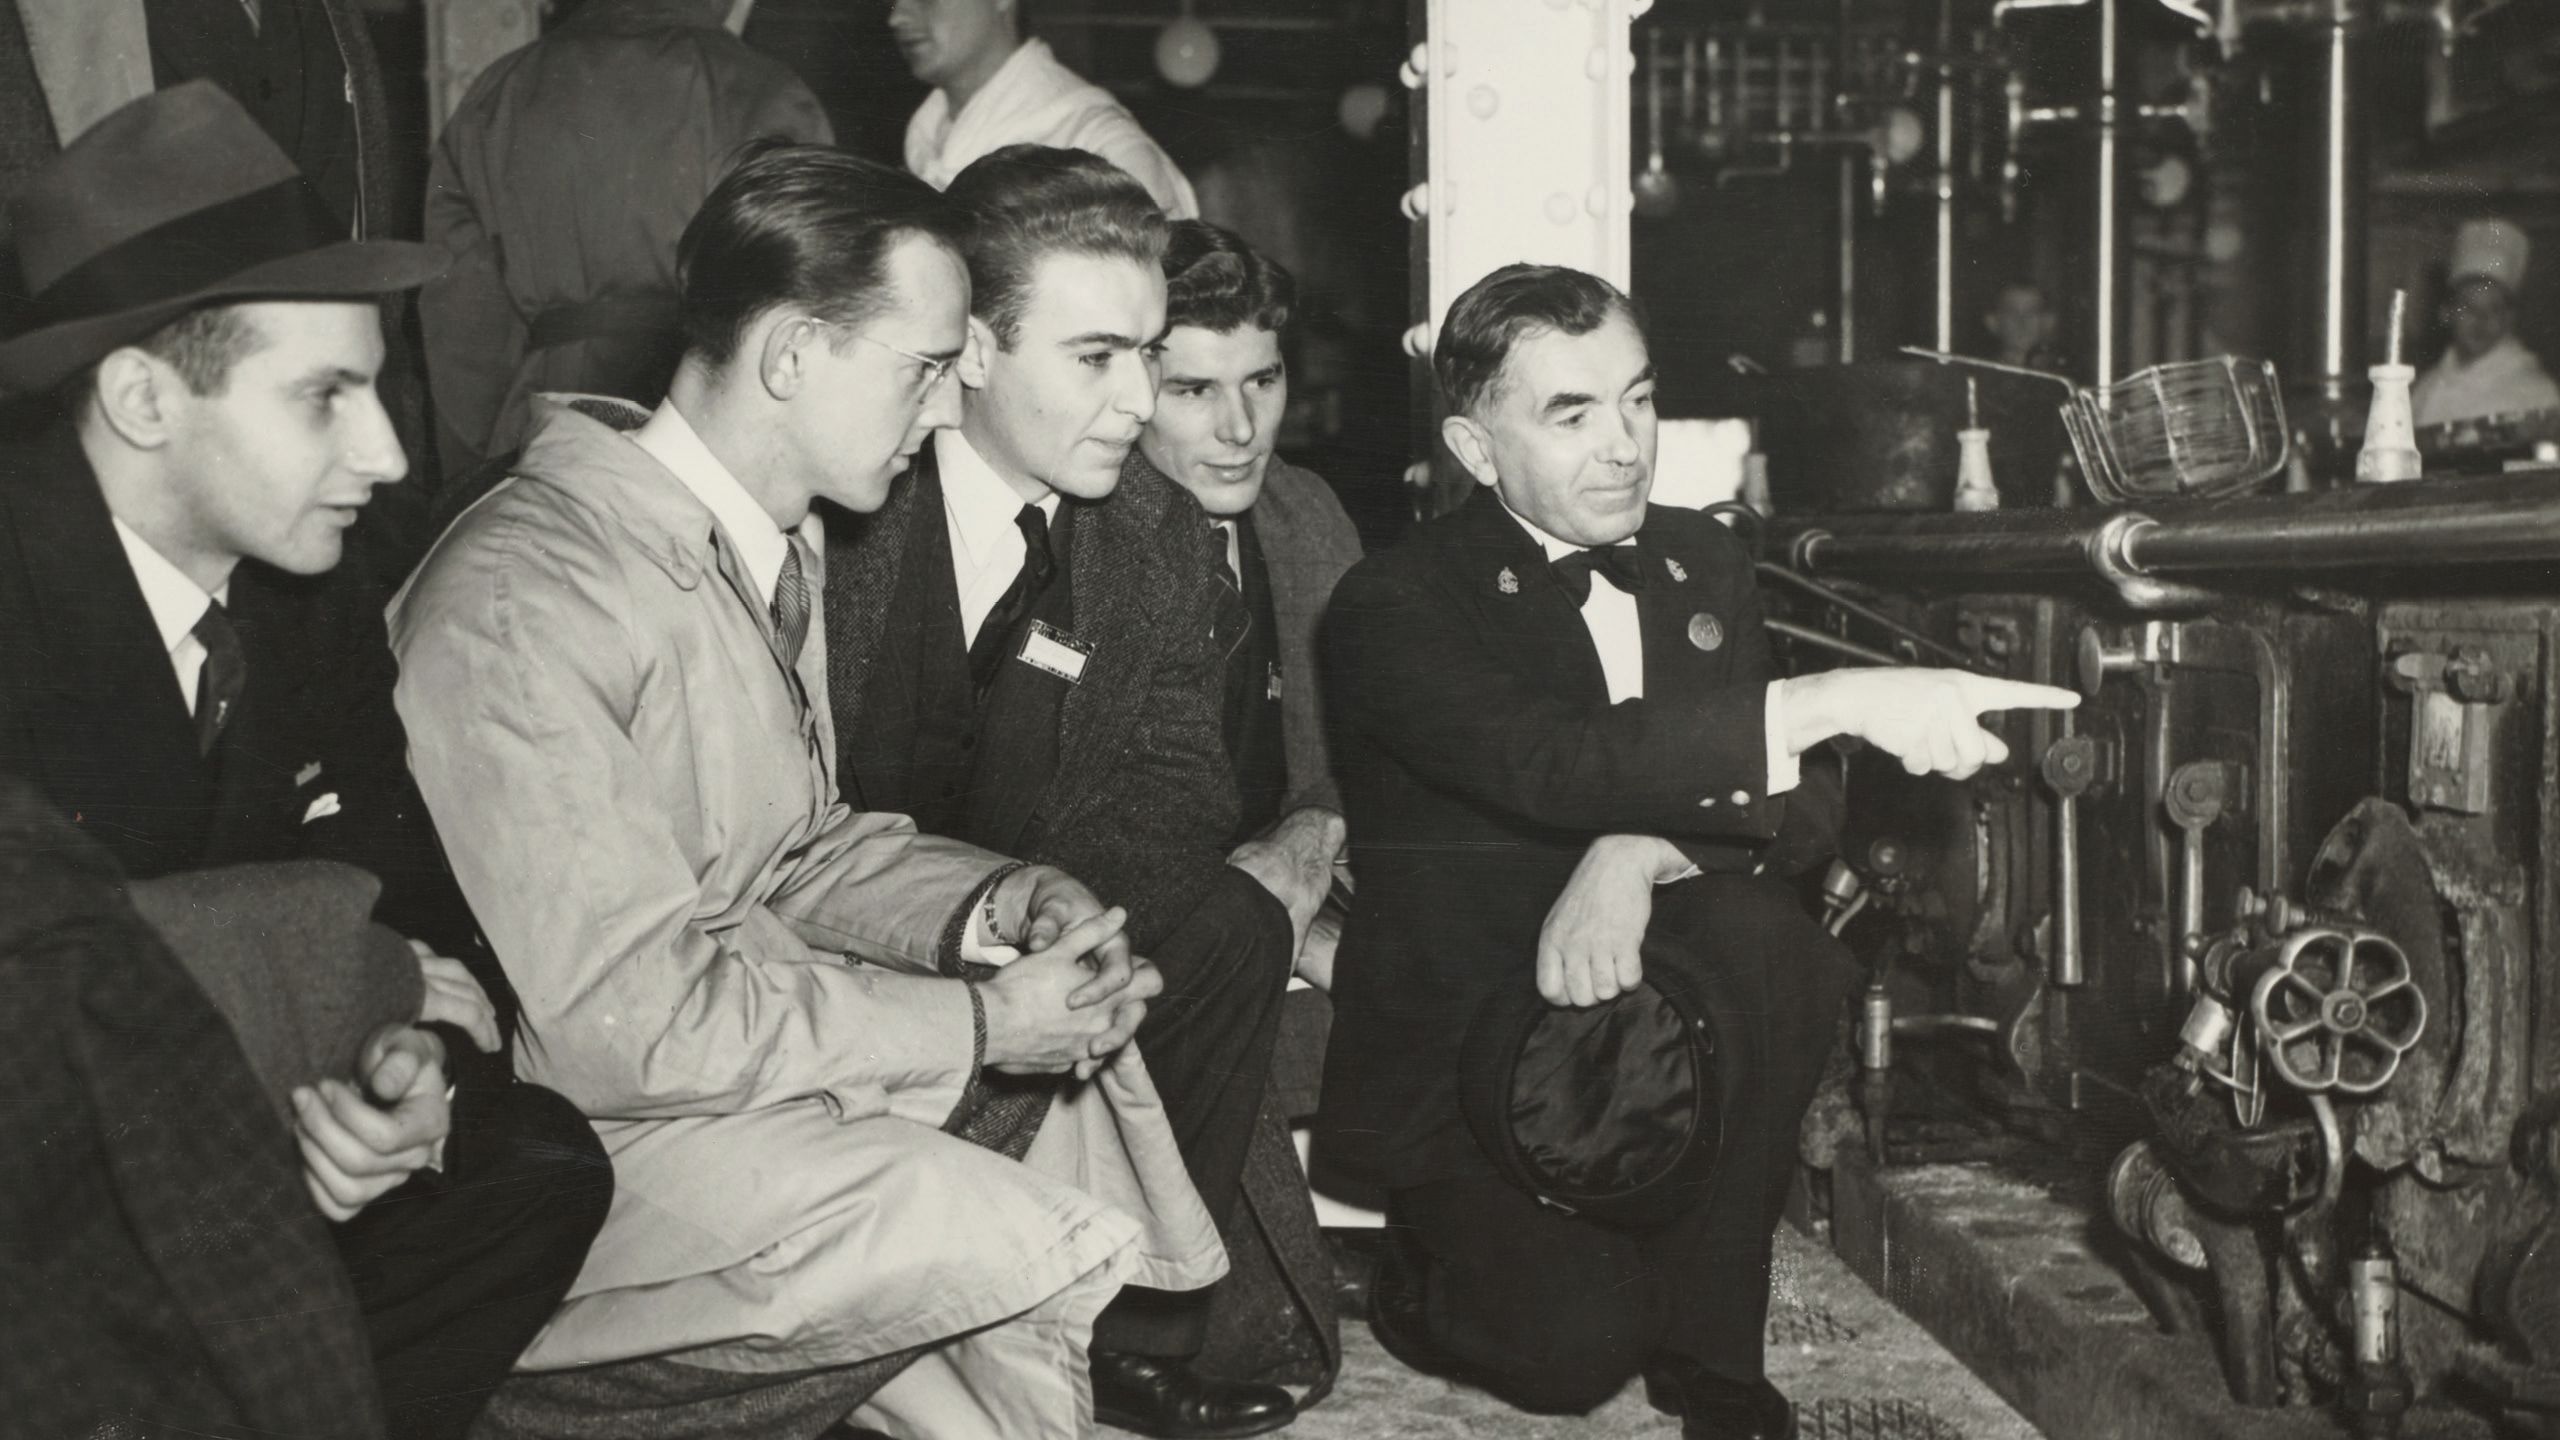 Black and white photo of men in suits crouching down to look at something. 